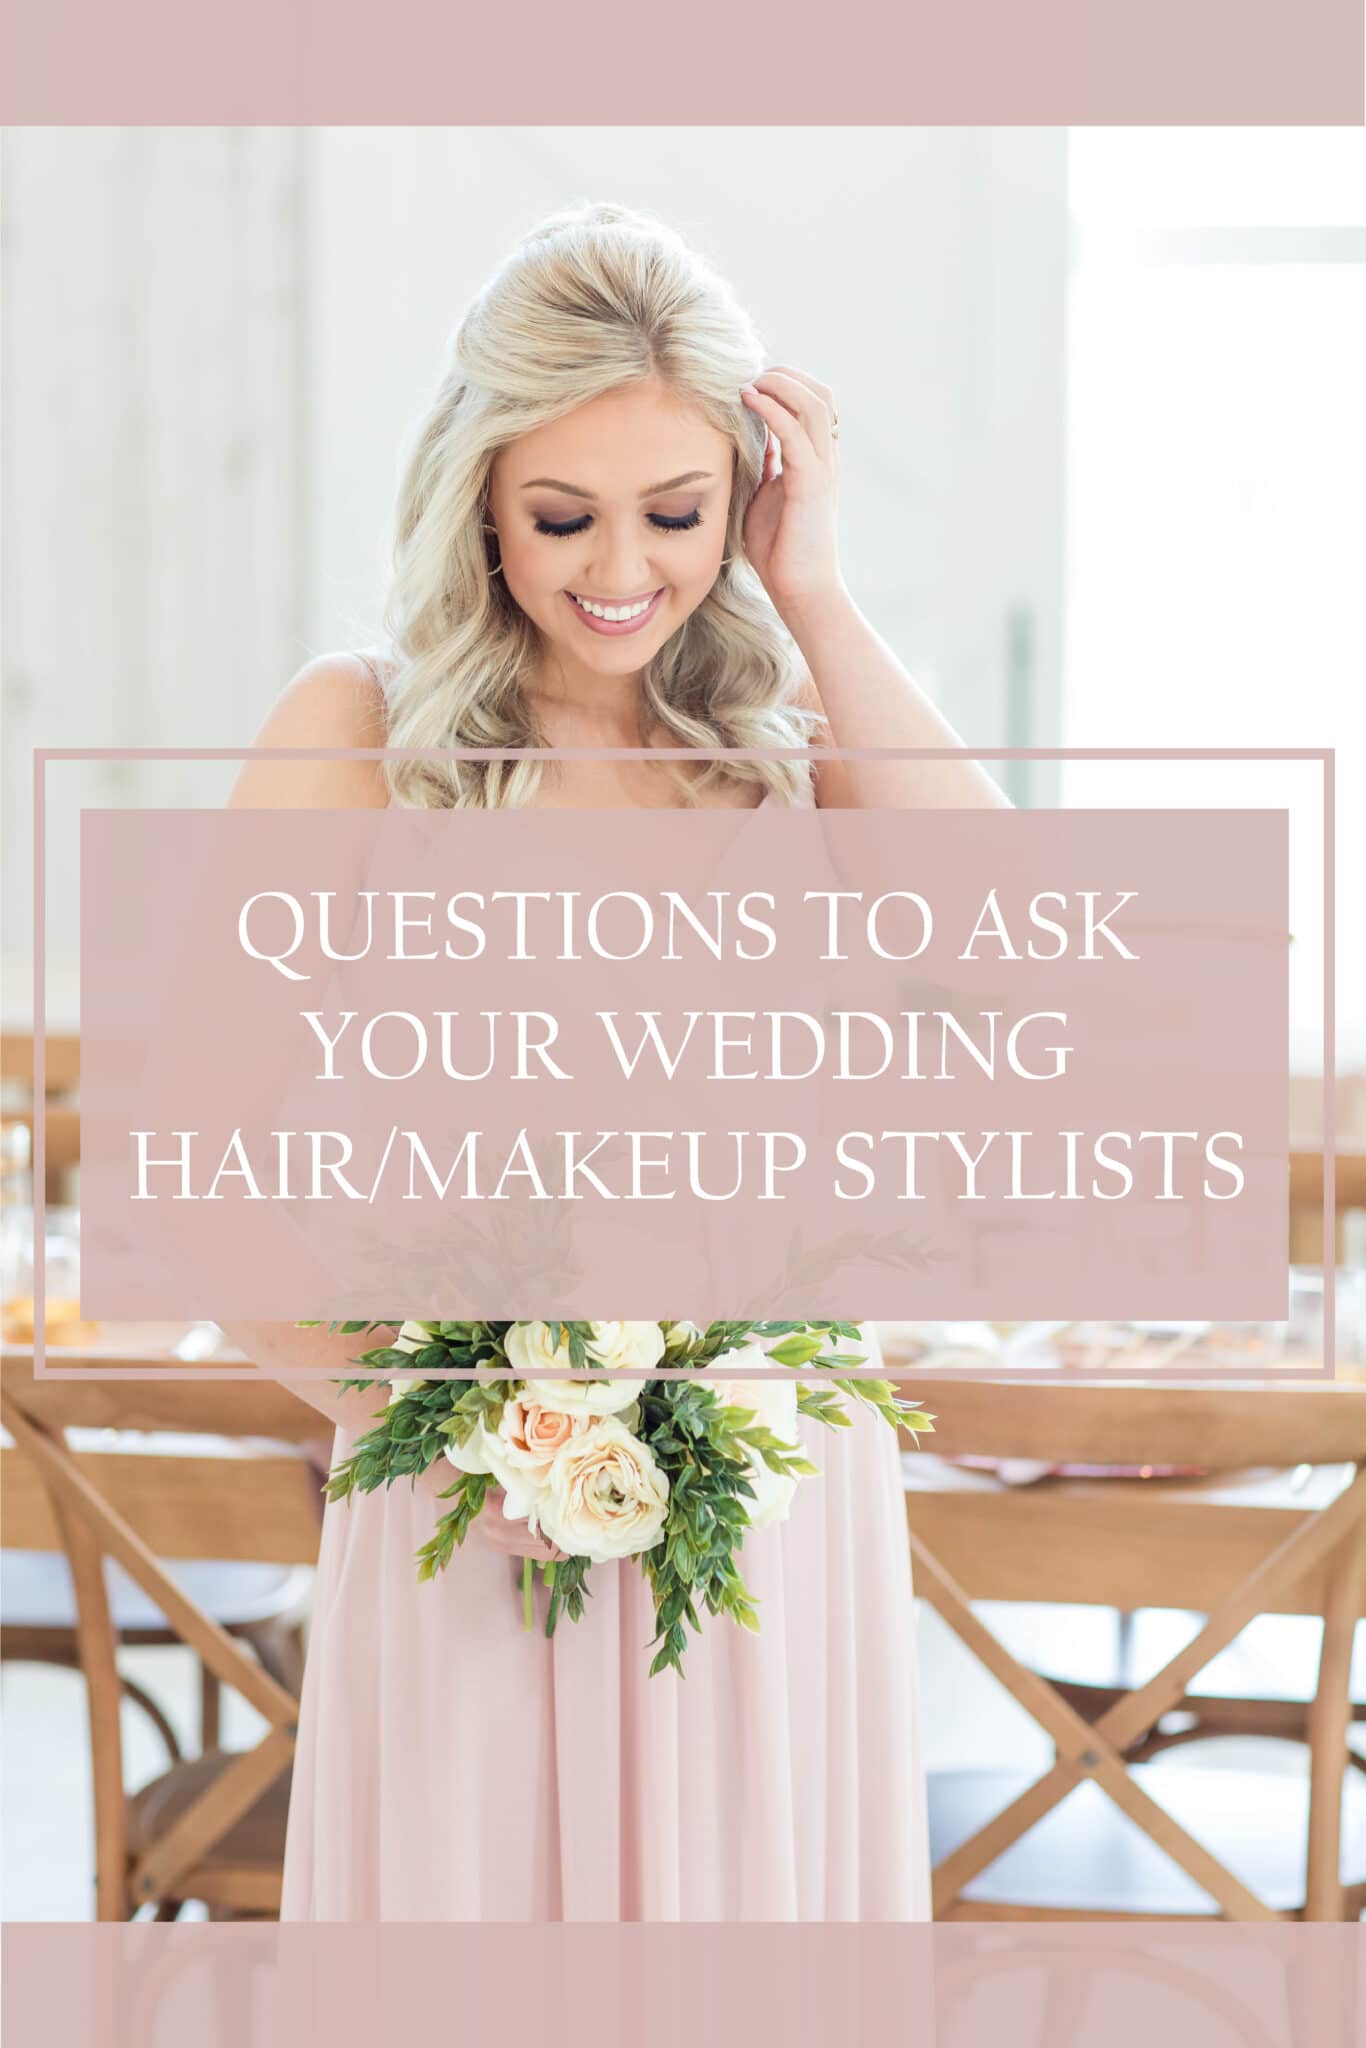 Sneak Peek #12: Questions to Ask Your Wedding Makeup and Hair Stylists |  Hitch Studio - Wedding Planning